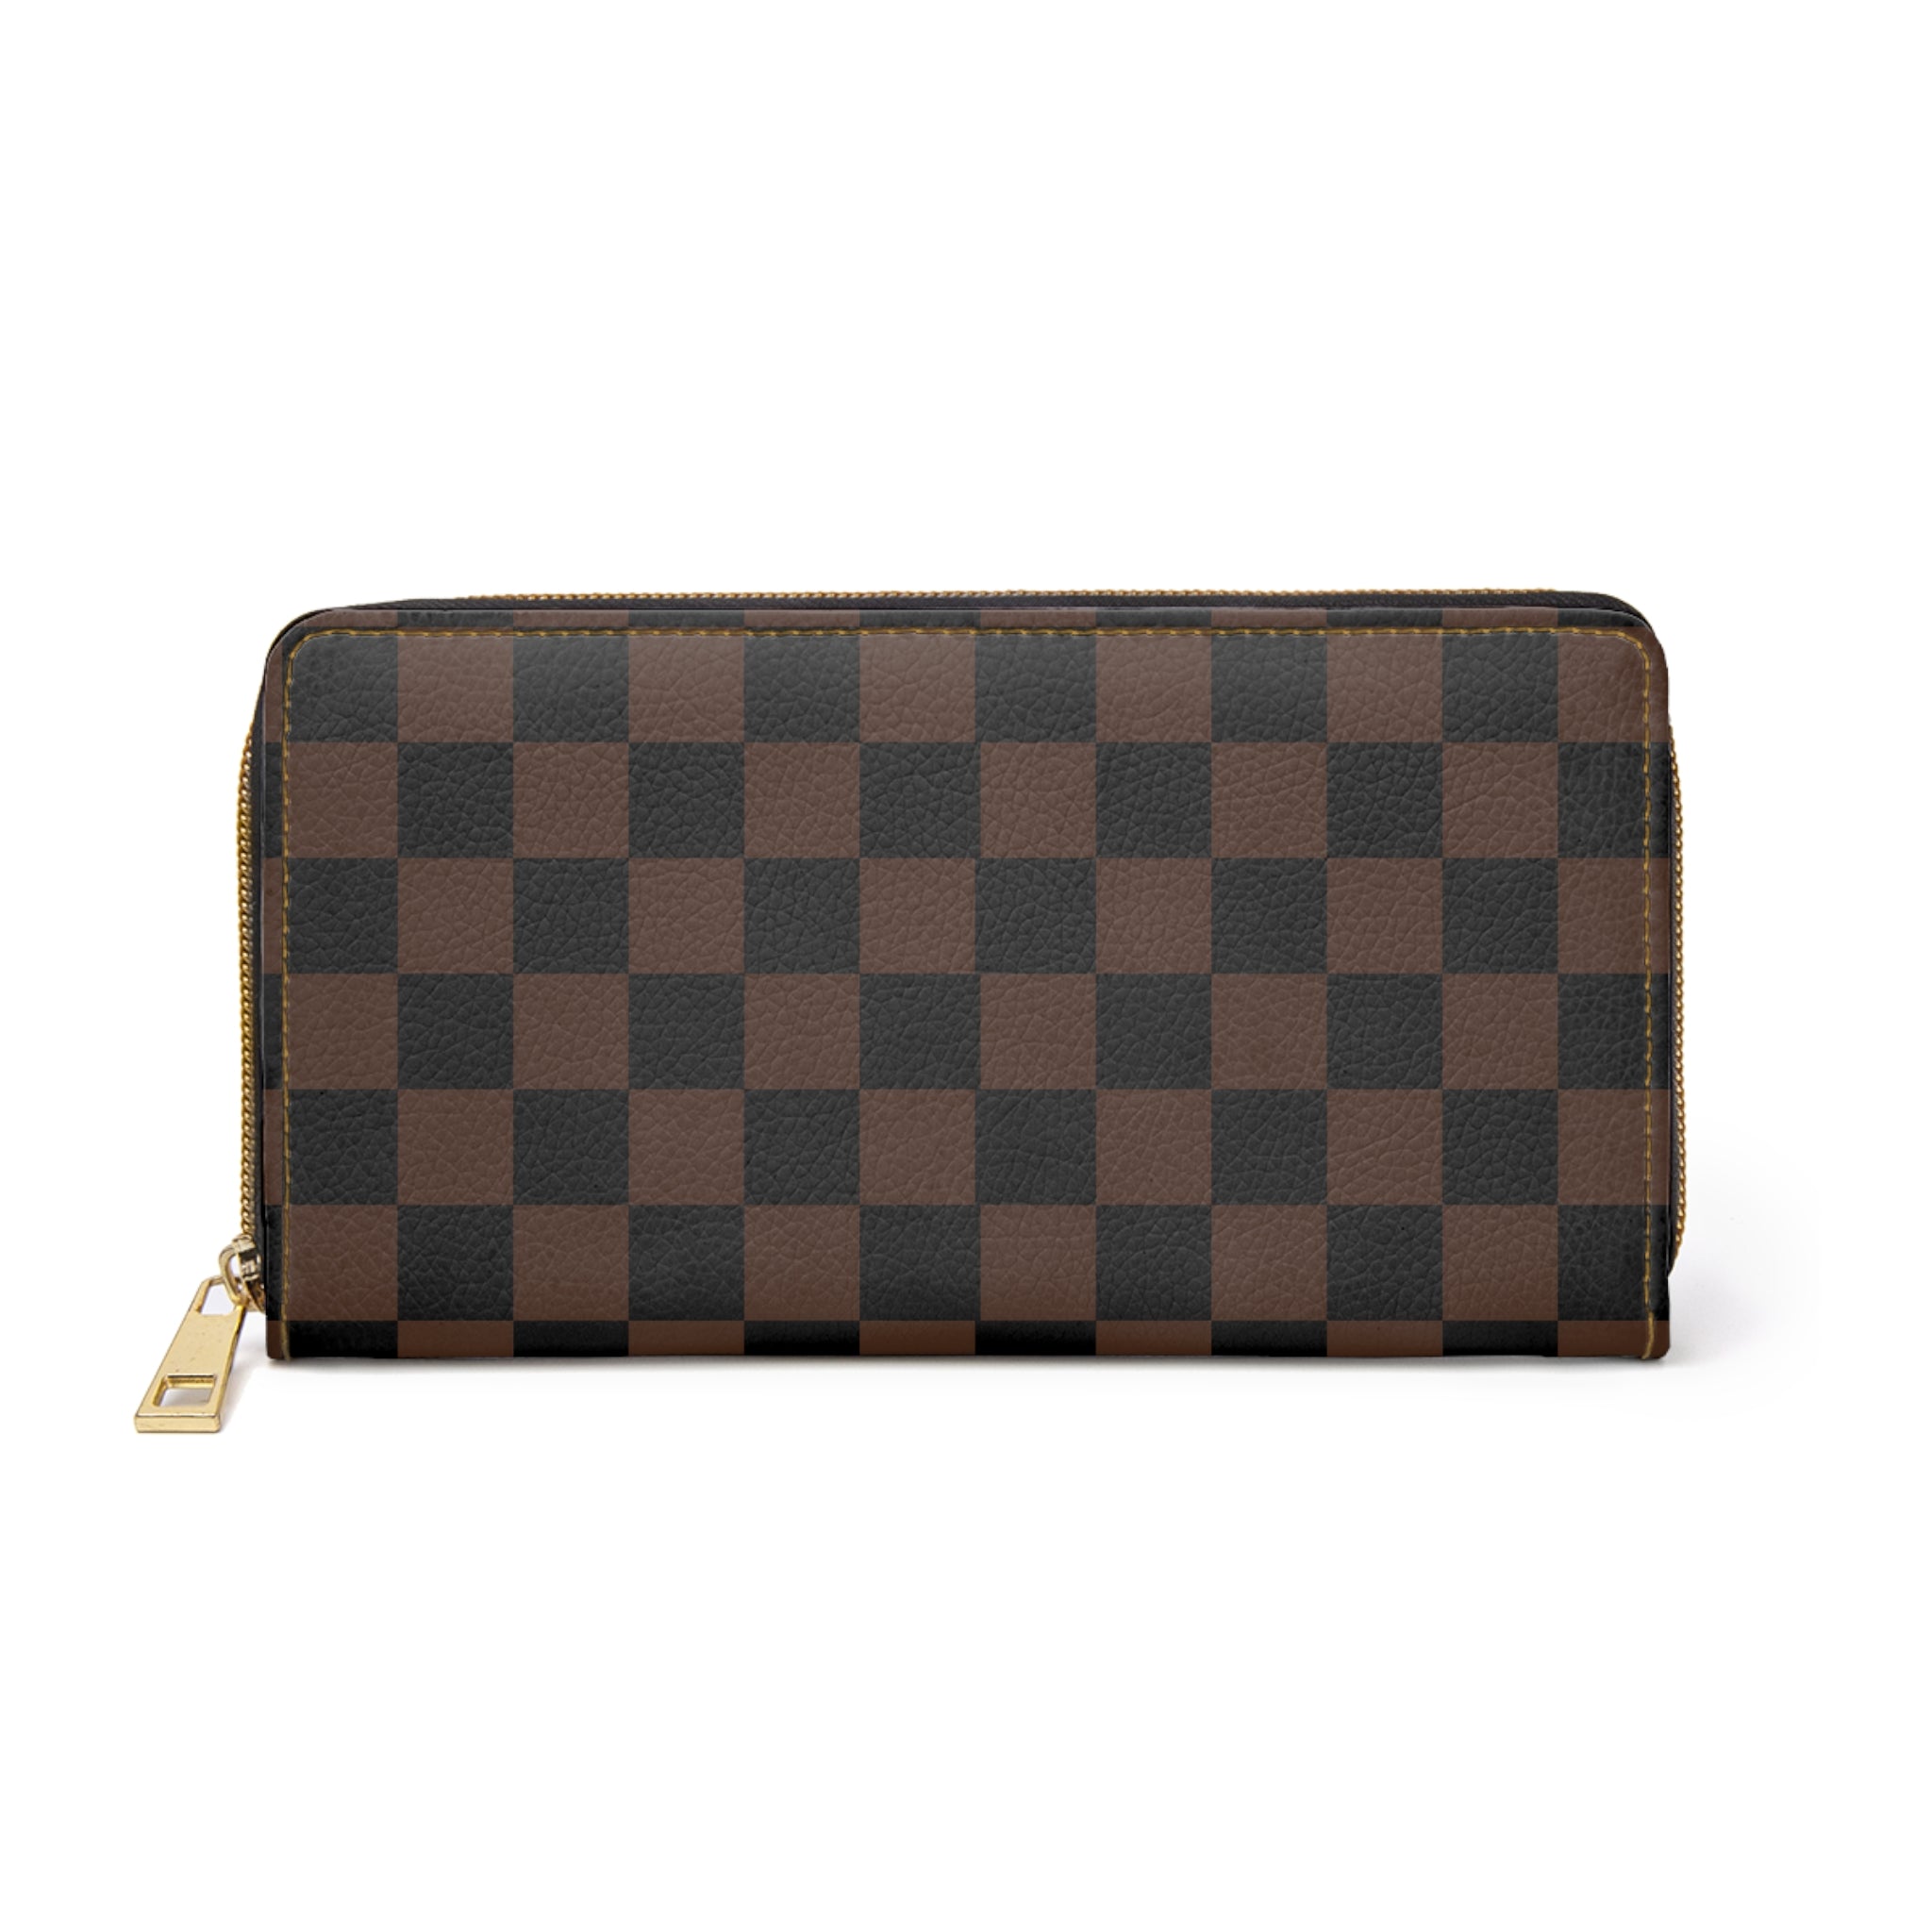 Check Mate in Dark Brown and Black Ladies Wallet, Zipper Pouch, Coin Purse, Zippered Wallet, Cute Purse